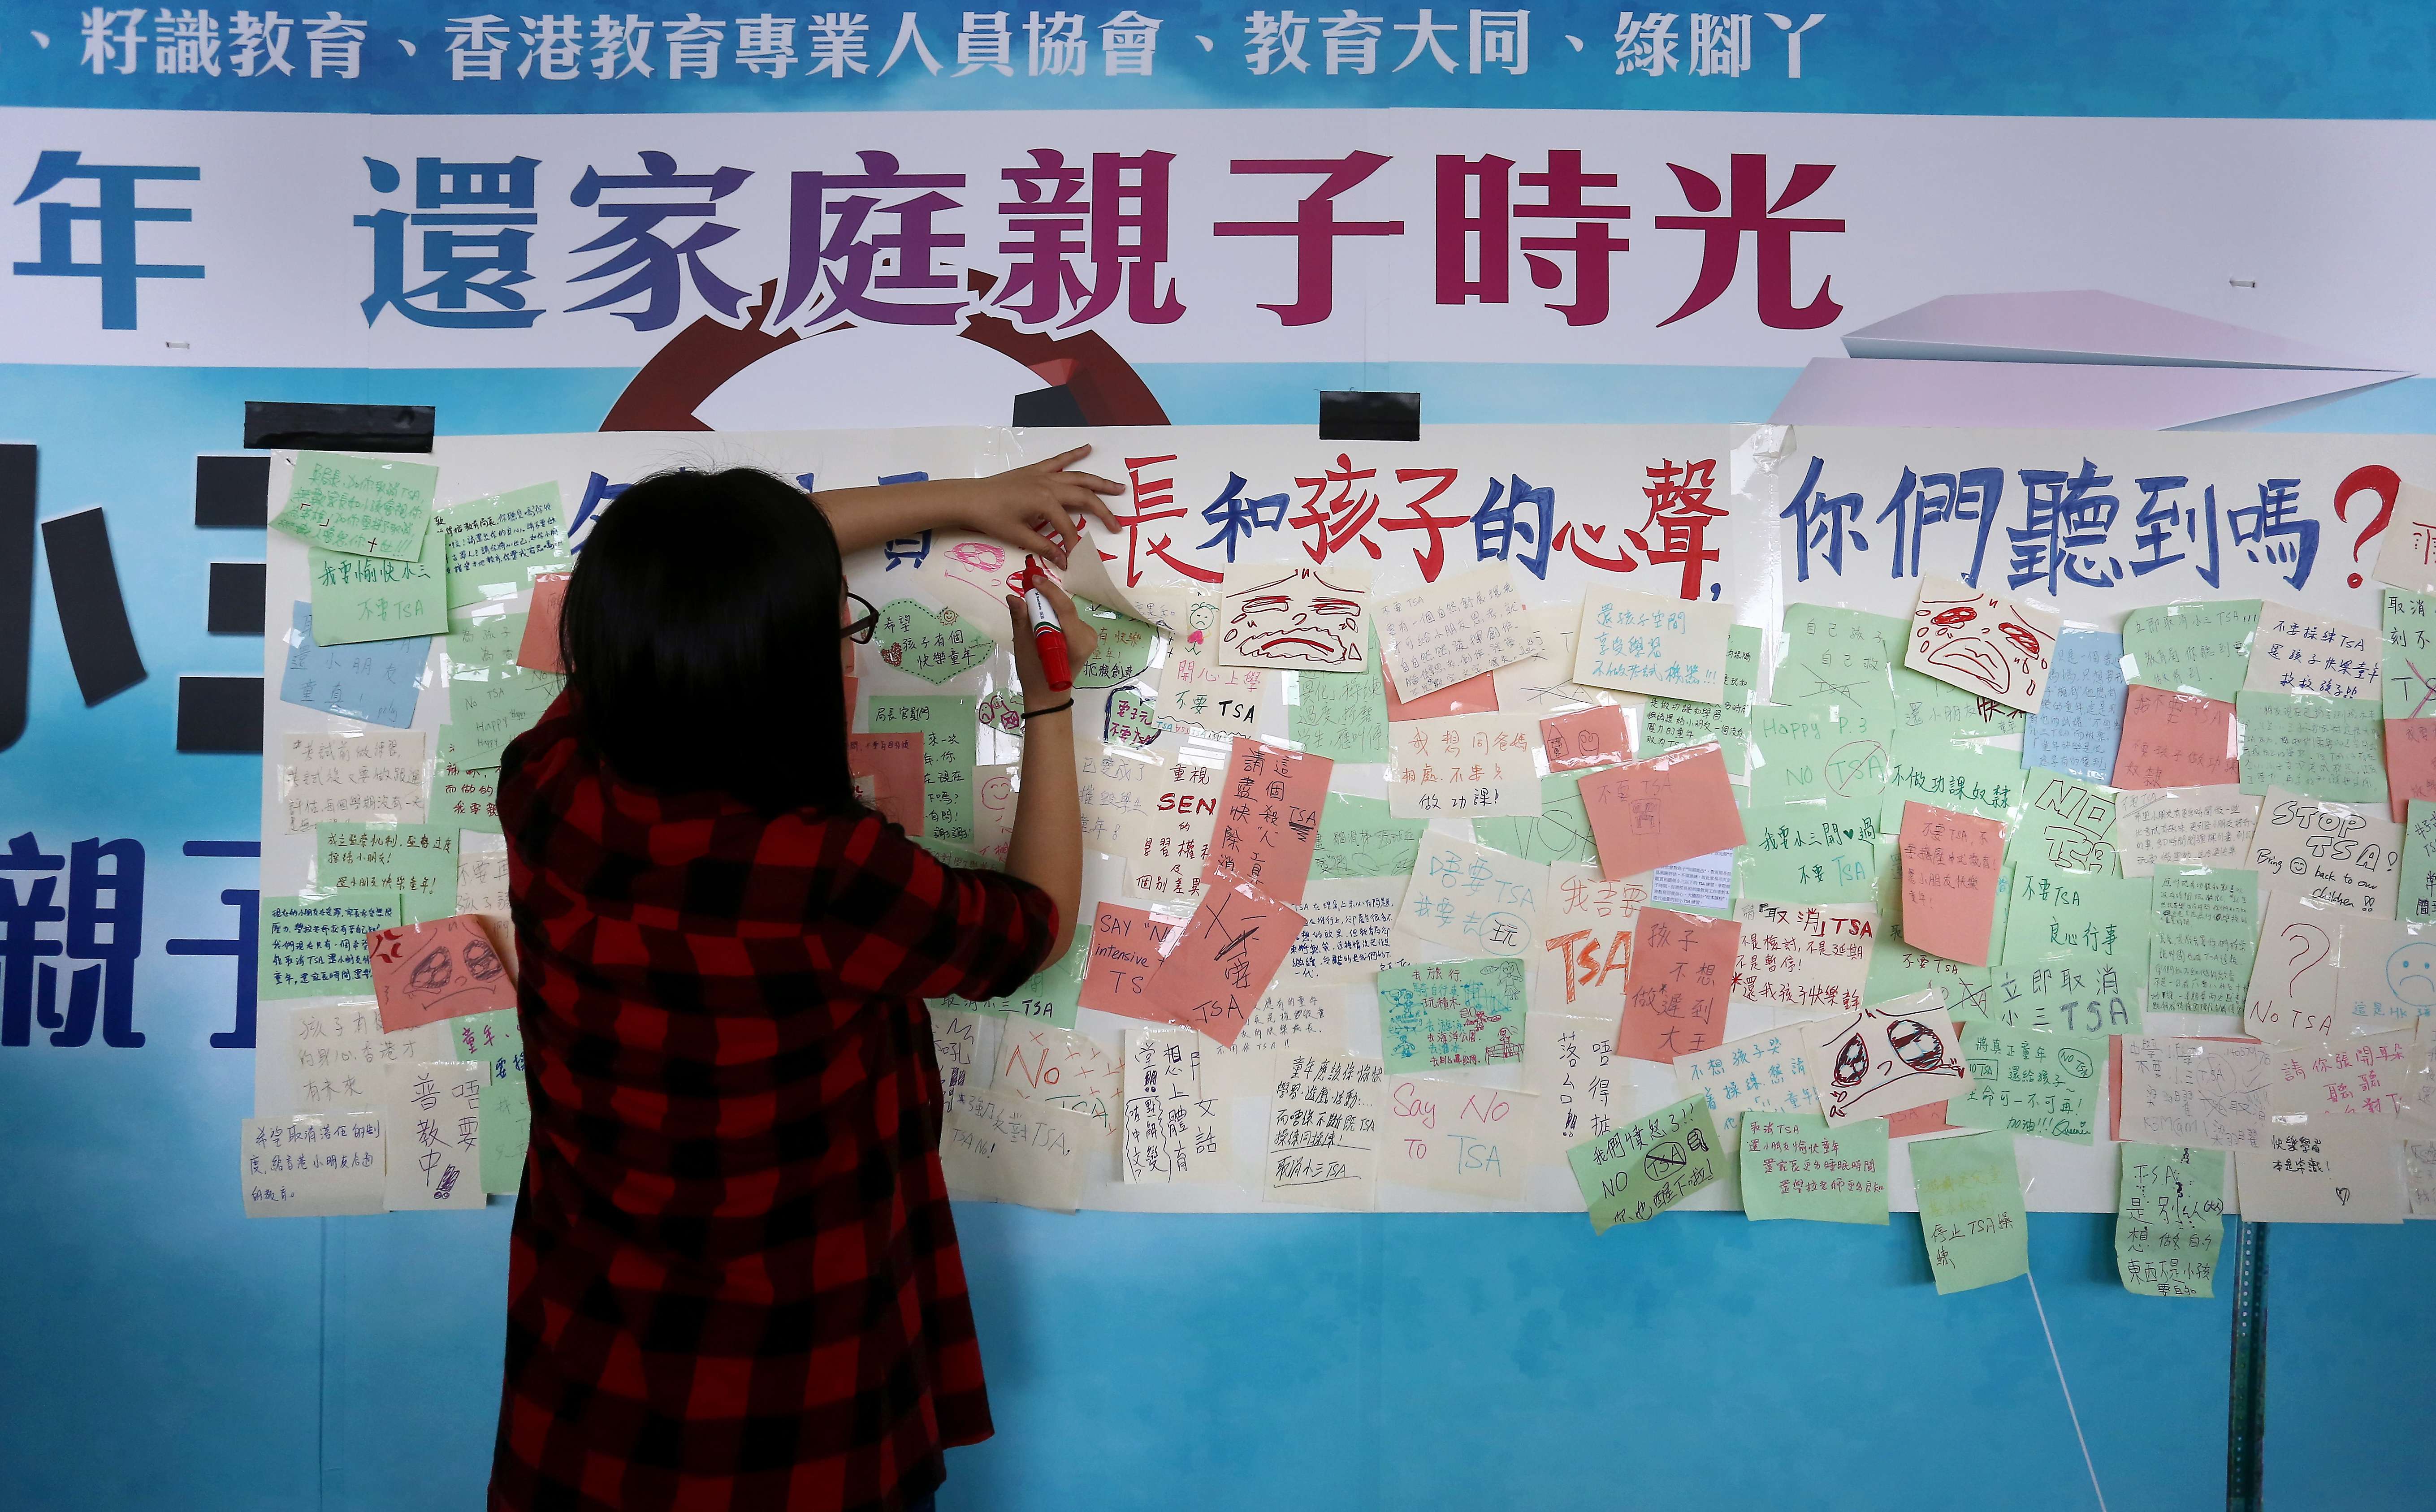 A woman writes on a message board put up by activists protesting against the TSA, outside the Legislative Council building in Tamar, in November 2015. Photo: Jonathan Wong